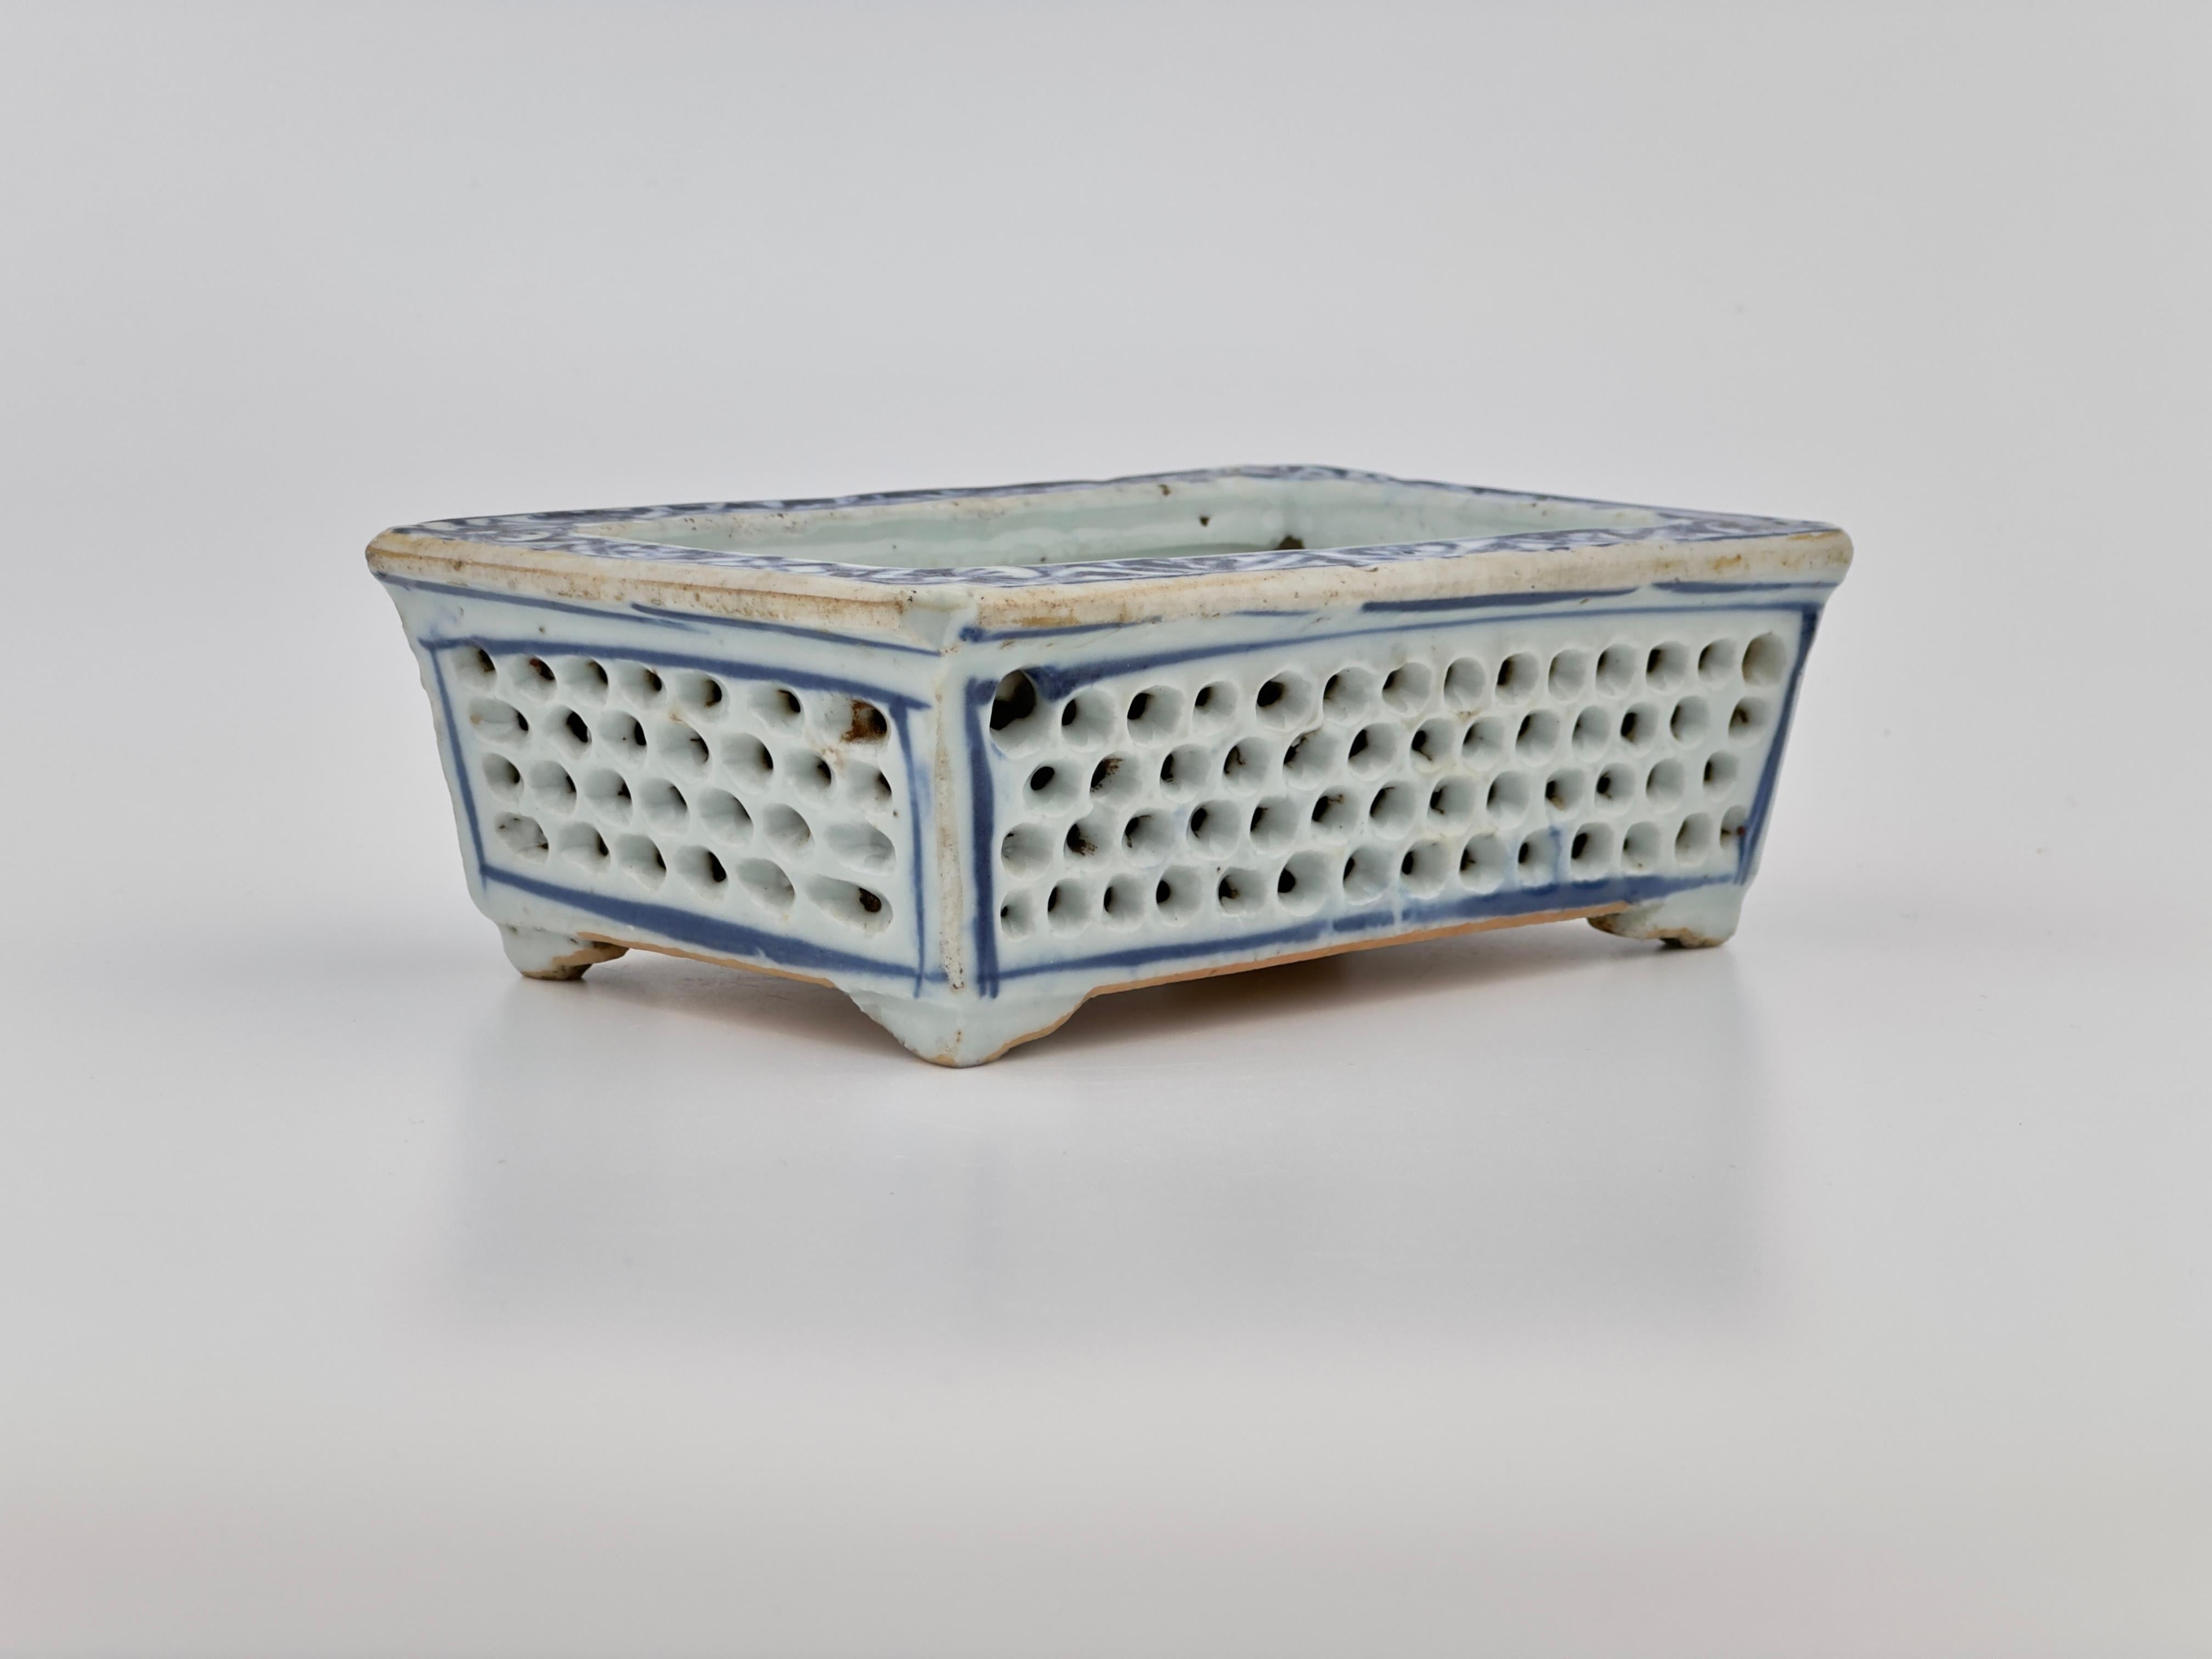 Early Qianlong Period Painted Chinese Export Reticulated Pierced Blue and White Porcelain Double Walled Shallow Planters of Rectangular Outline. Circa last quarter of the Eighteenth Century. Each finely hand decorated on all outer panels and top